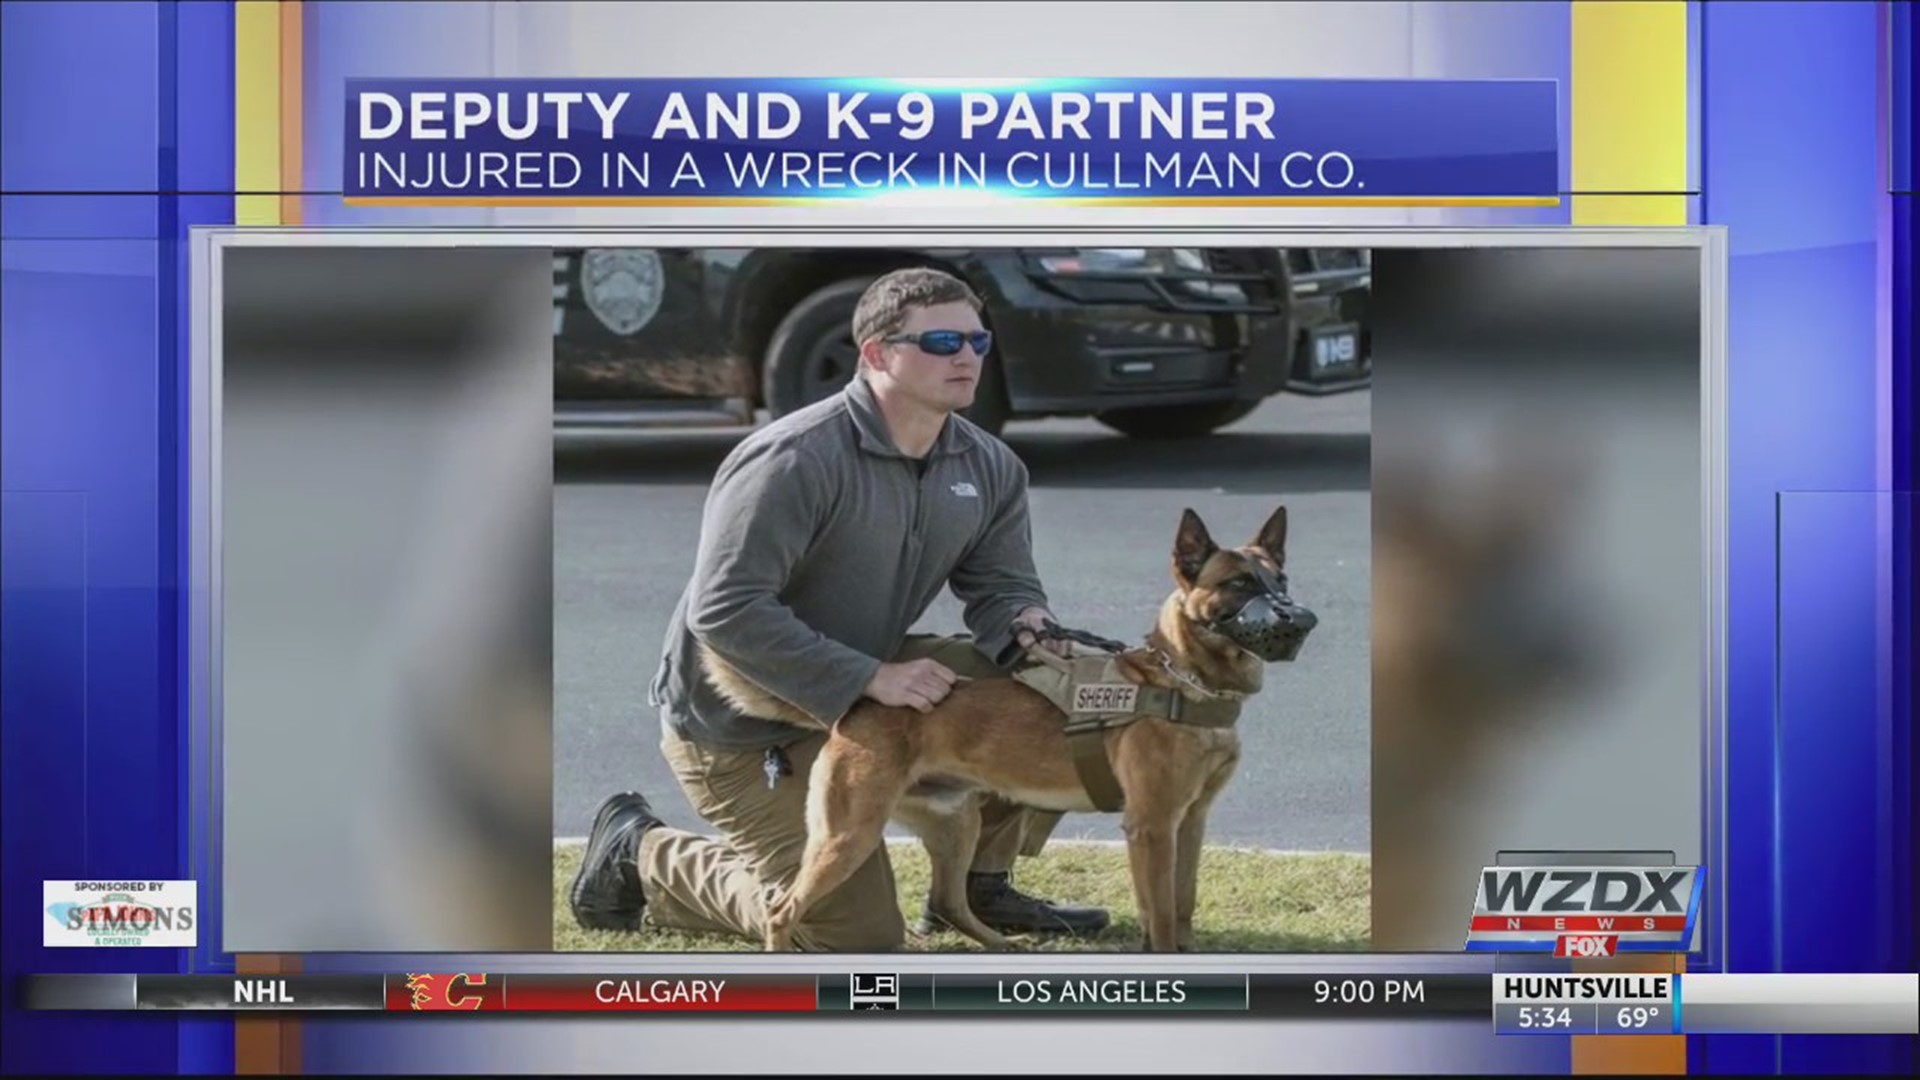 UPDATE: Deputy Adam Clark remains in critical condition but is making improvement, according to Cullman County Sheriff Matt Gentry. He gave the update in a news conference on Wednesday. Clark’s K9 partner Figo is in stable condition at an Auburn veterinarian’s office.